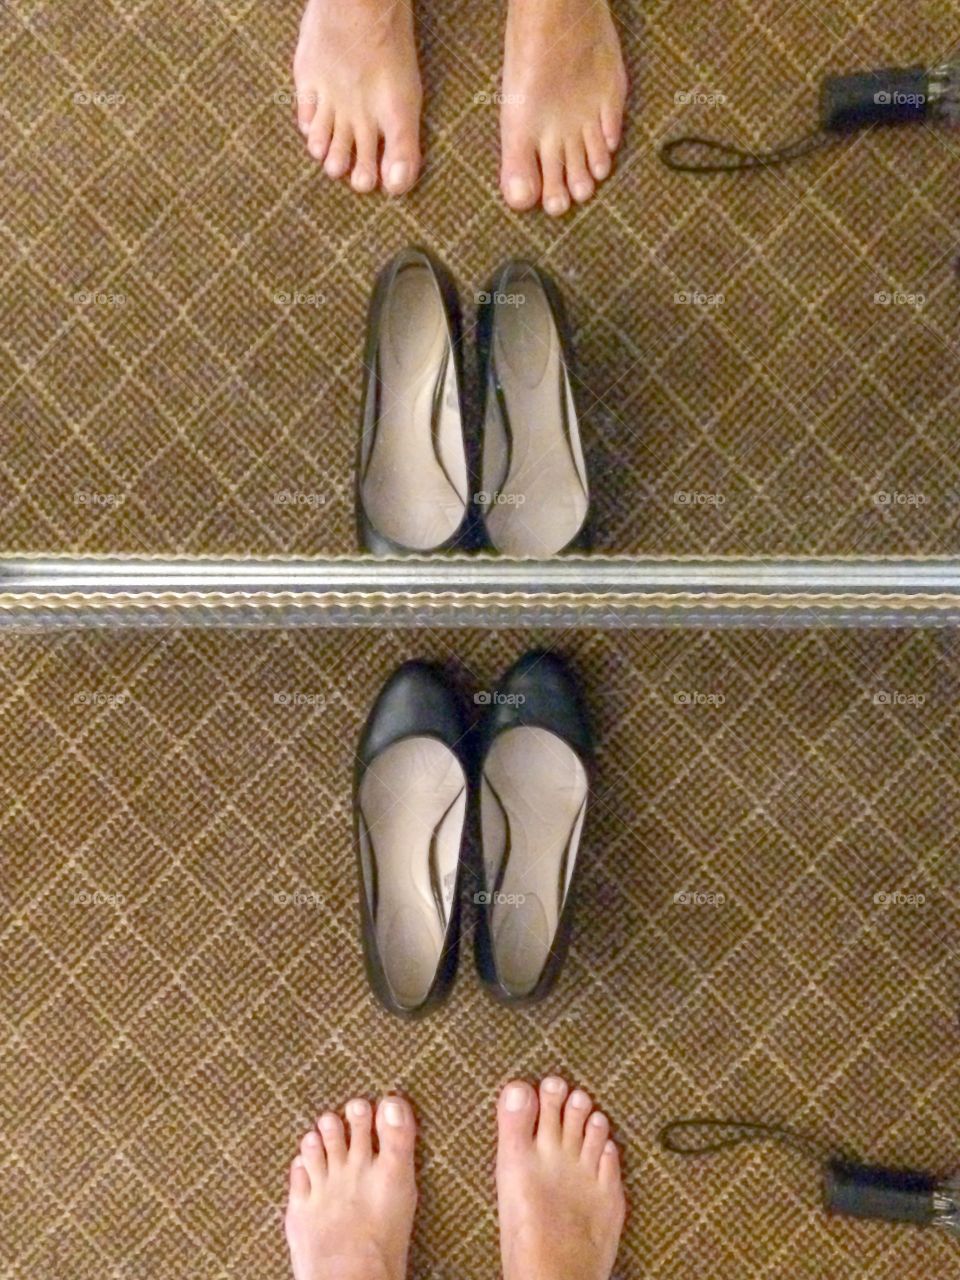 Female feet, shoe selfie, reflection in mirror, umbrella on floor. The last step to getting dressed, putting shoes on. However, these female feet hesitate to wear heels in the rain.